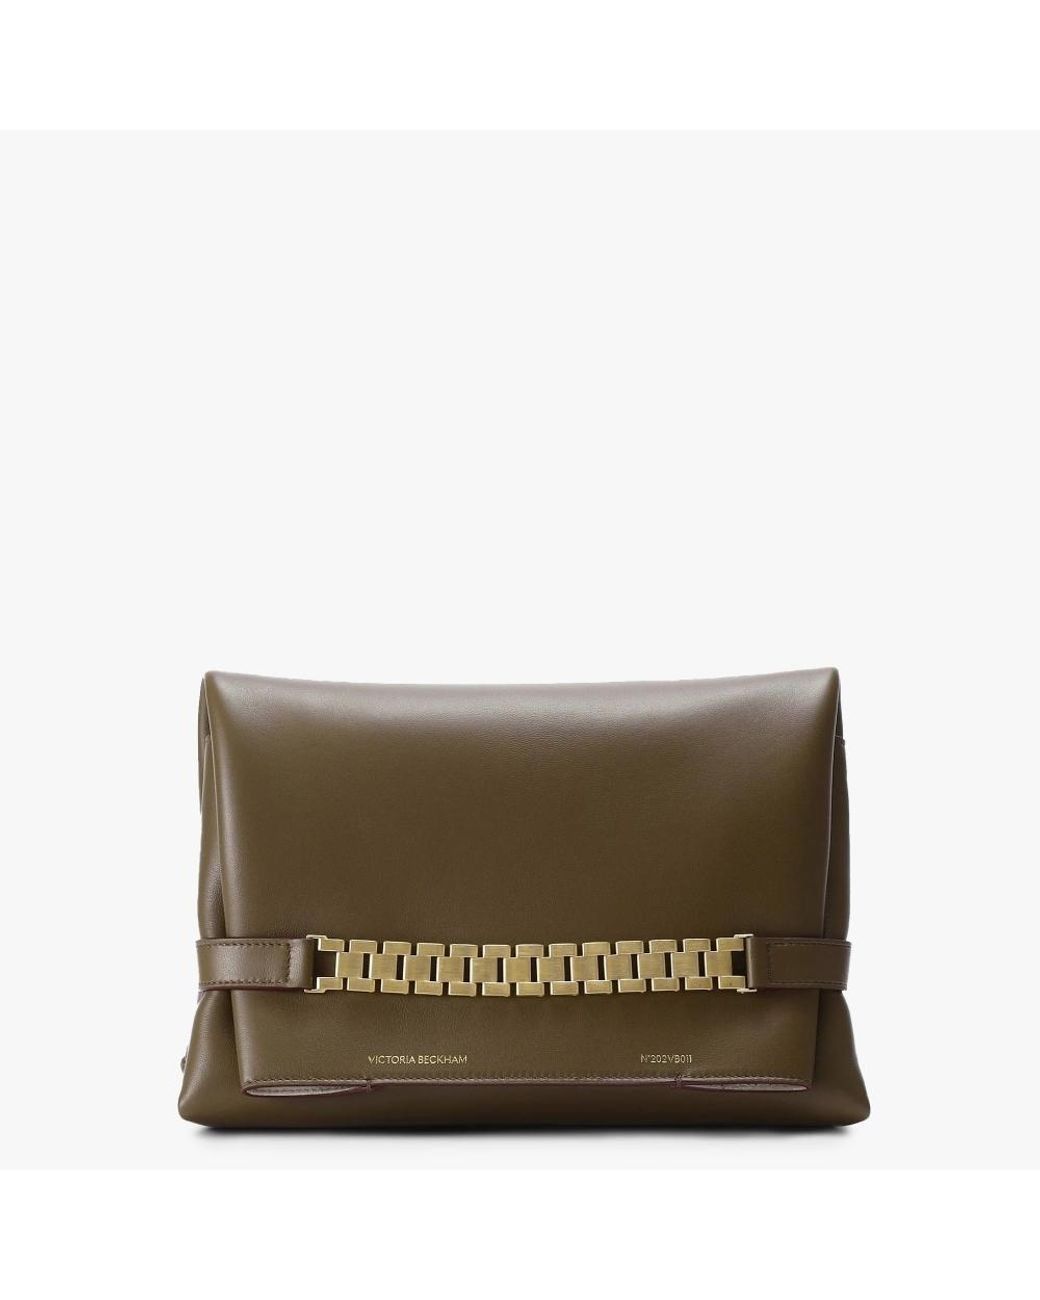 Victoria Beckham Chain Pouch With Strap Khaki Leather Shoulder Bag in ...